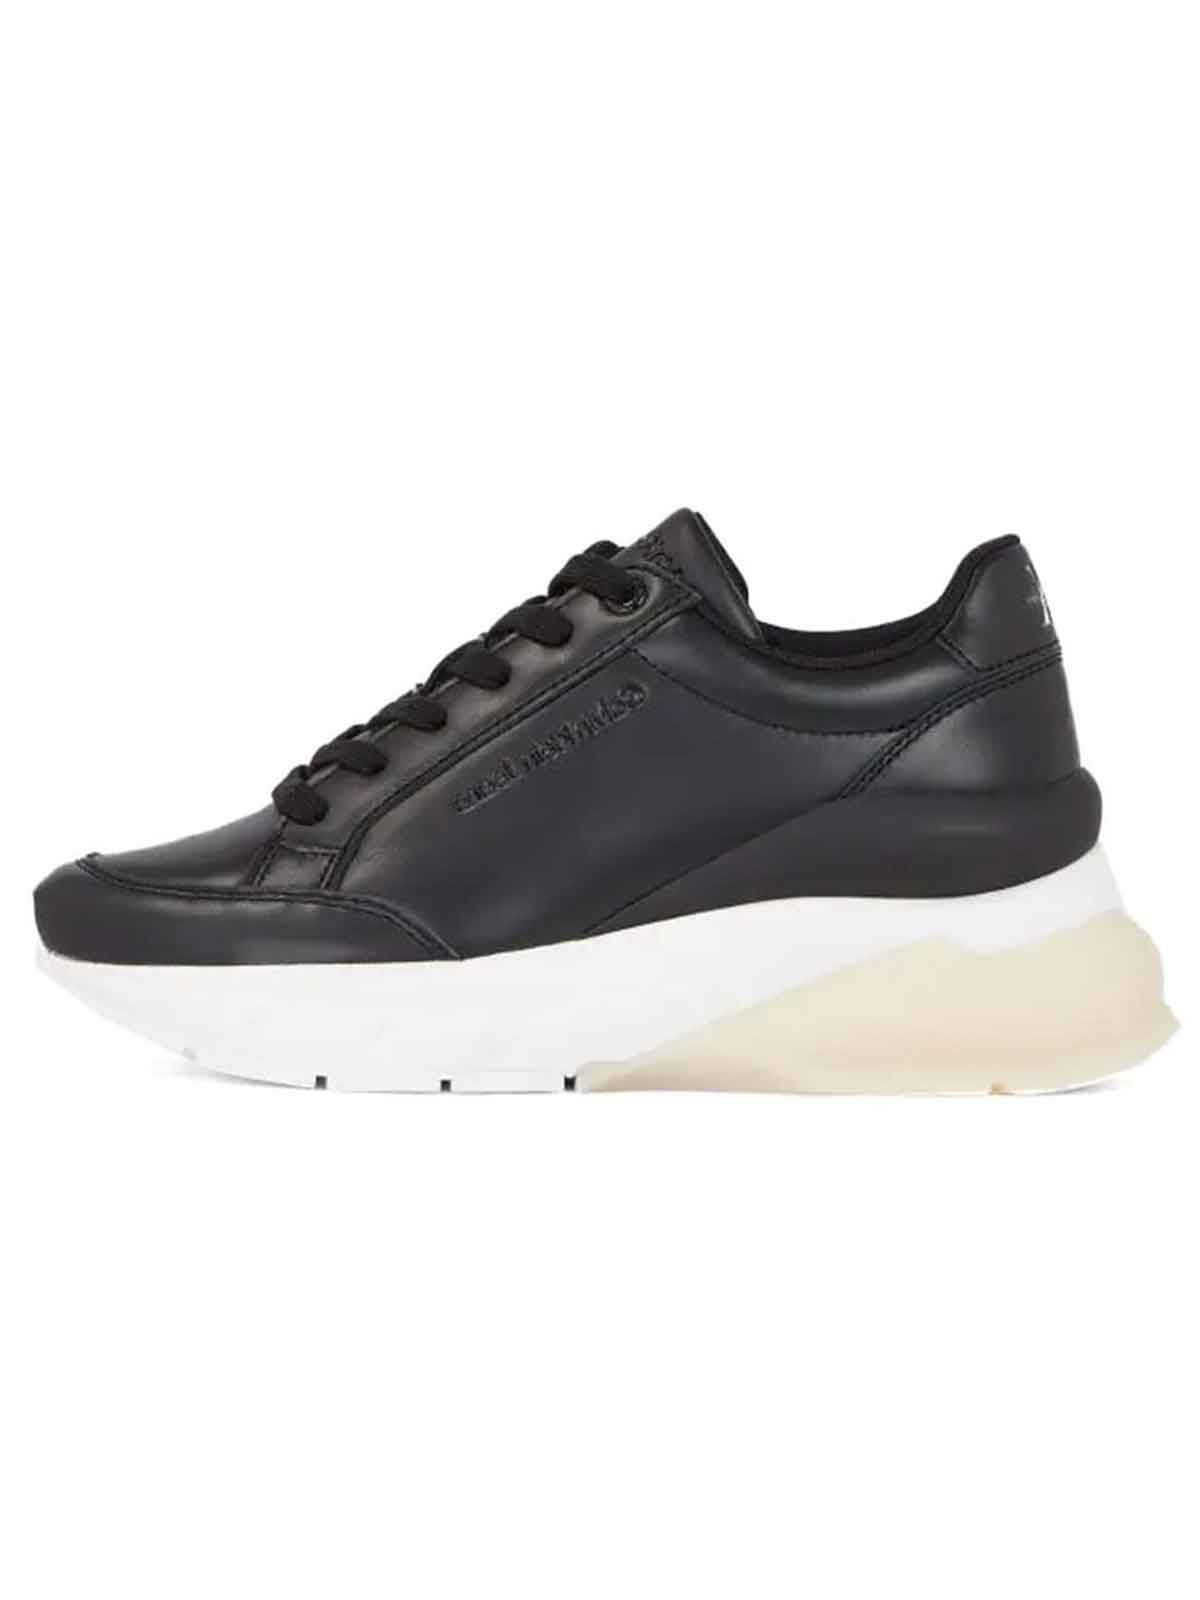   Calvin Klein | Wedge Runner Lace Up Sneakers |  